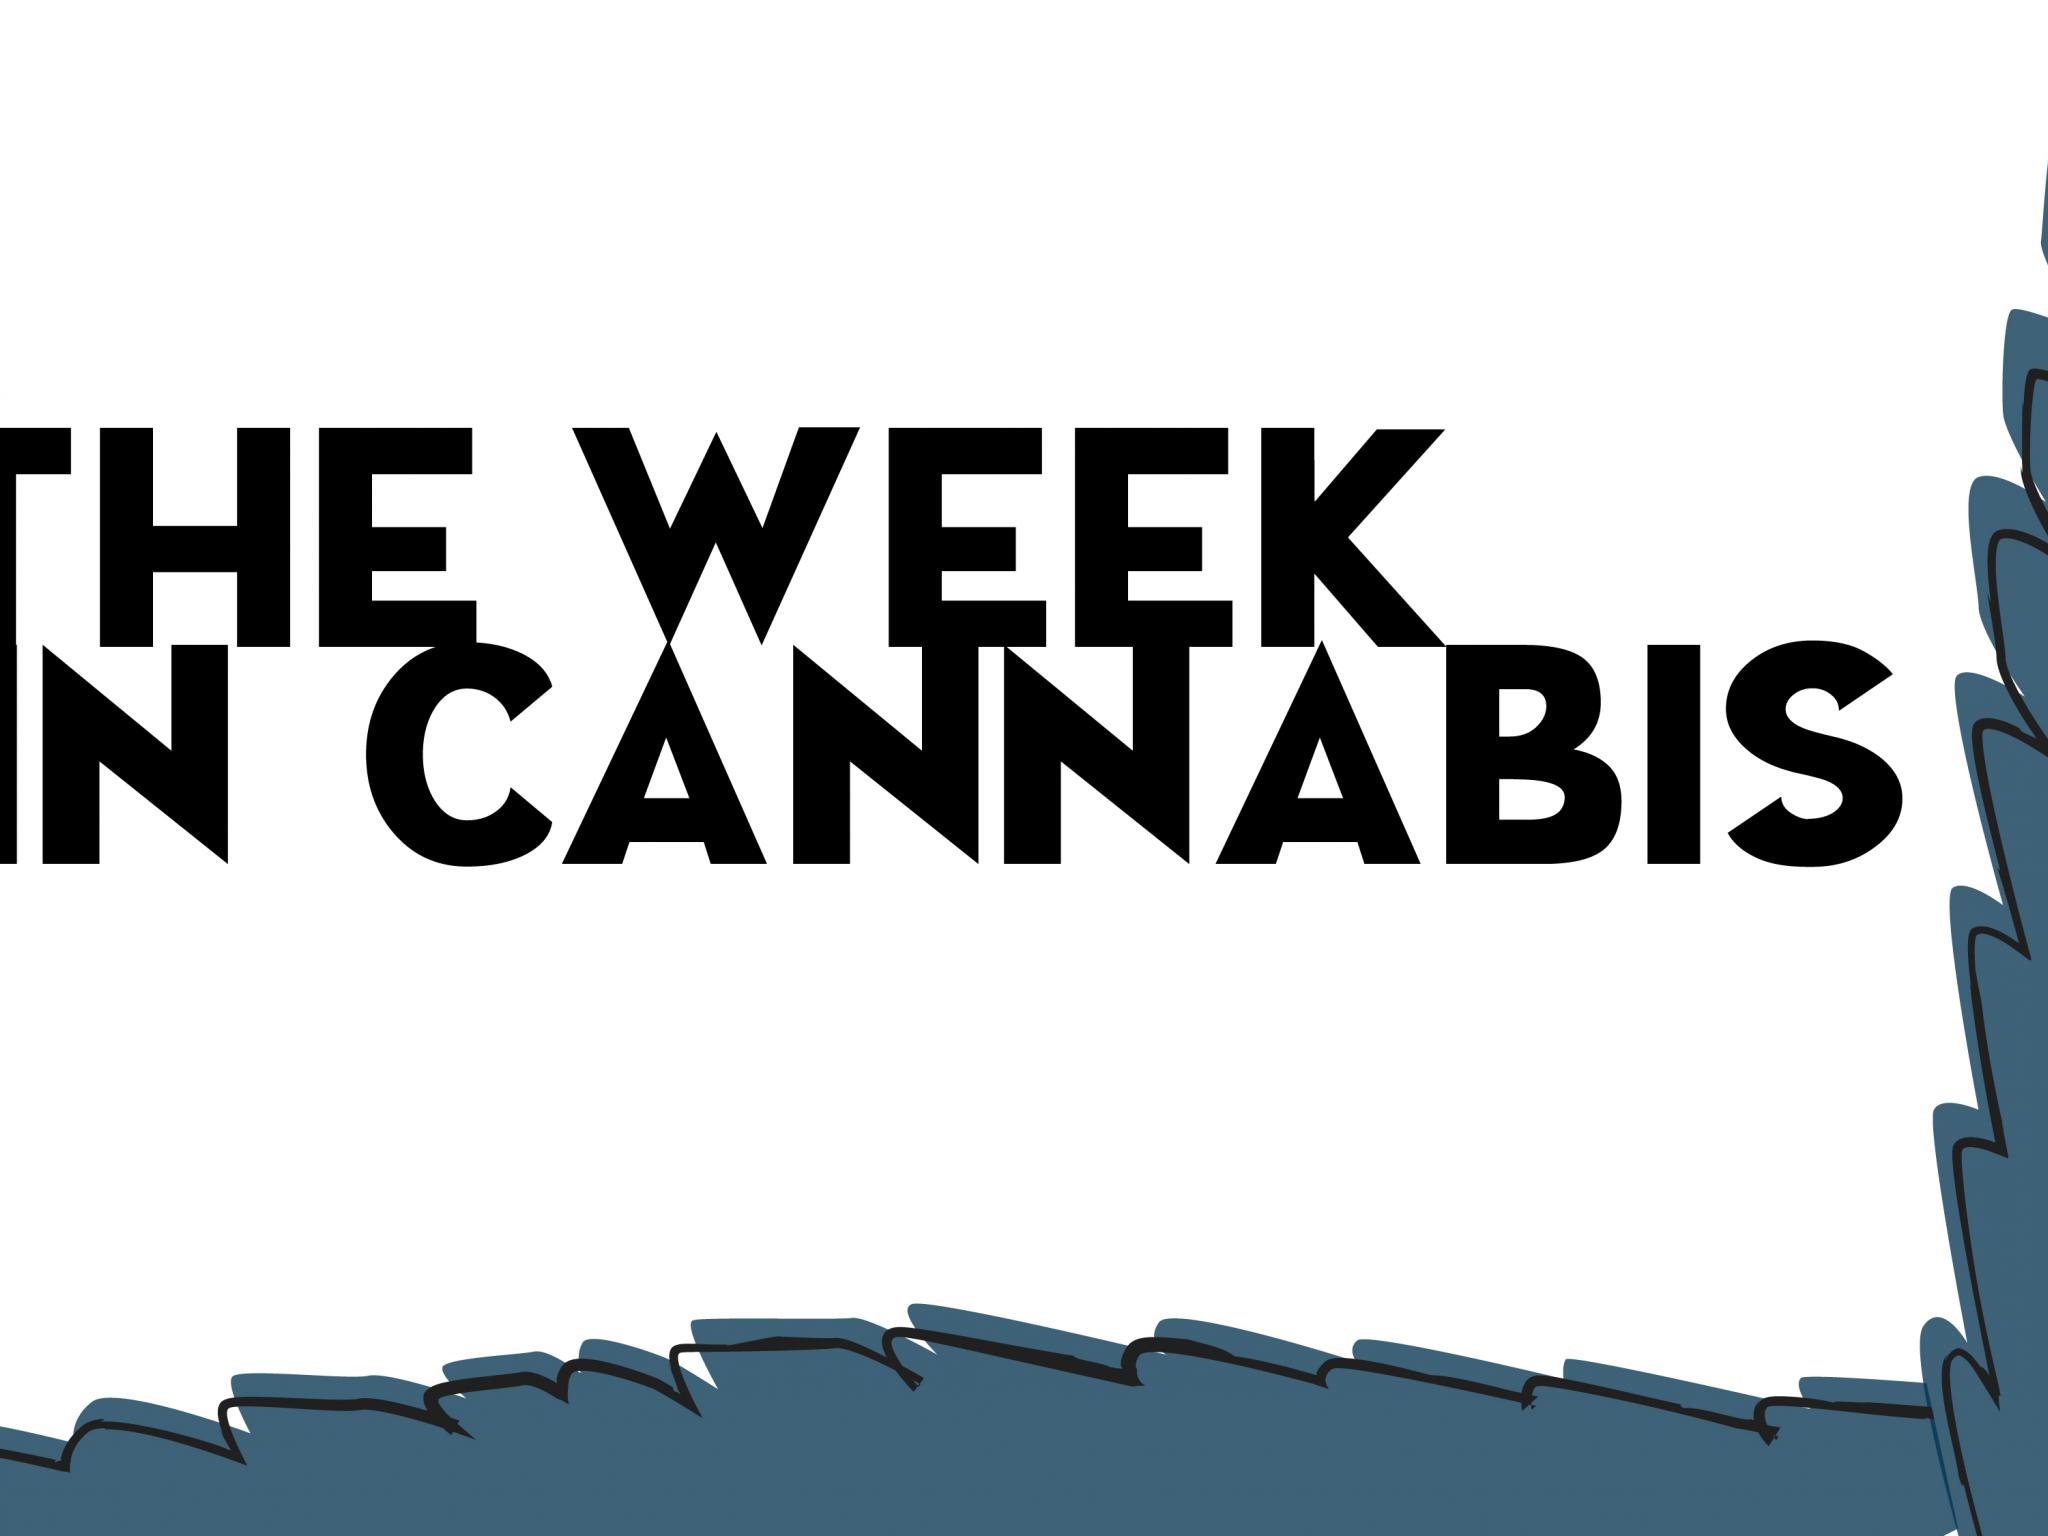  the-week-in-cannabis-house-approves-banking-bill-stocks-surge-mississippi-legalizes-medical-ma-hexos-troubles-and-more 